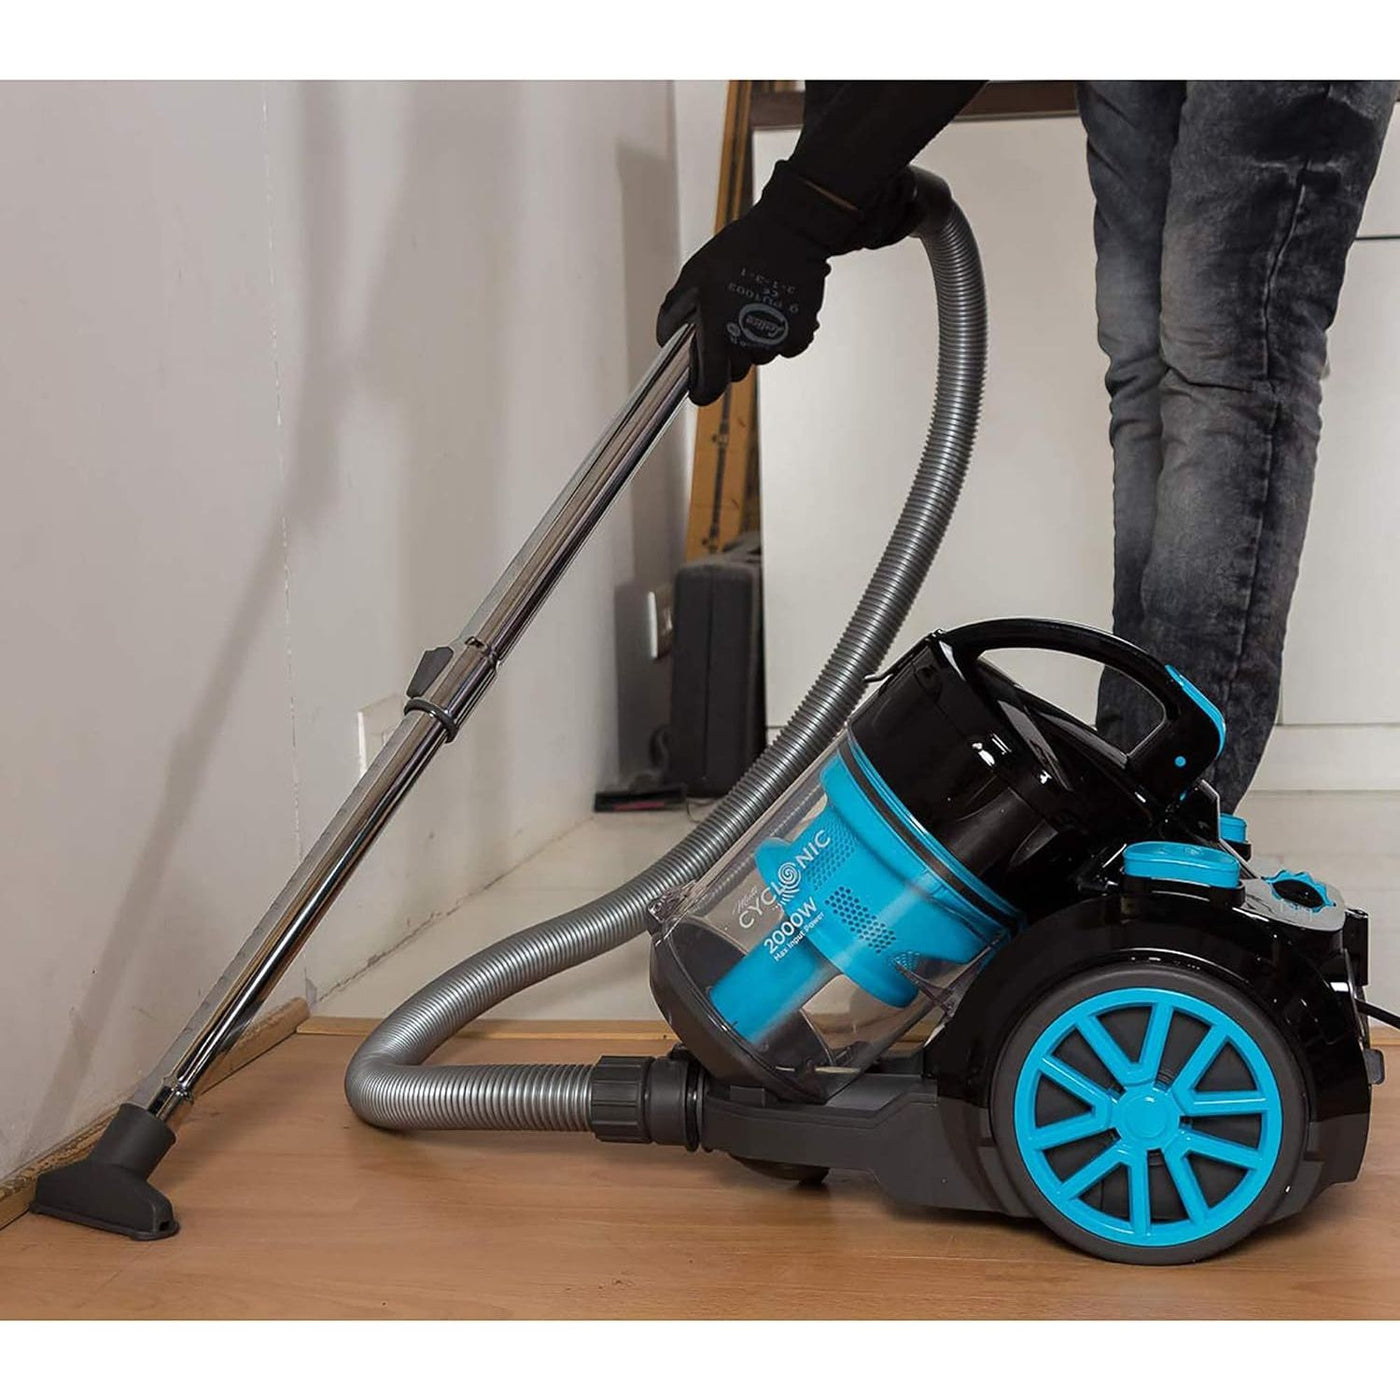 2000w 2.5l corded vacuum cleaner 21kpa suction power multi-cyclonic bagless vacuum, with 6 stage filtration, 1.5m 360-degree swivel hose and a washable filter